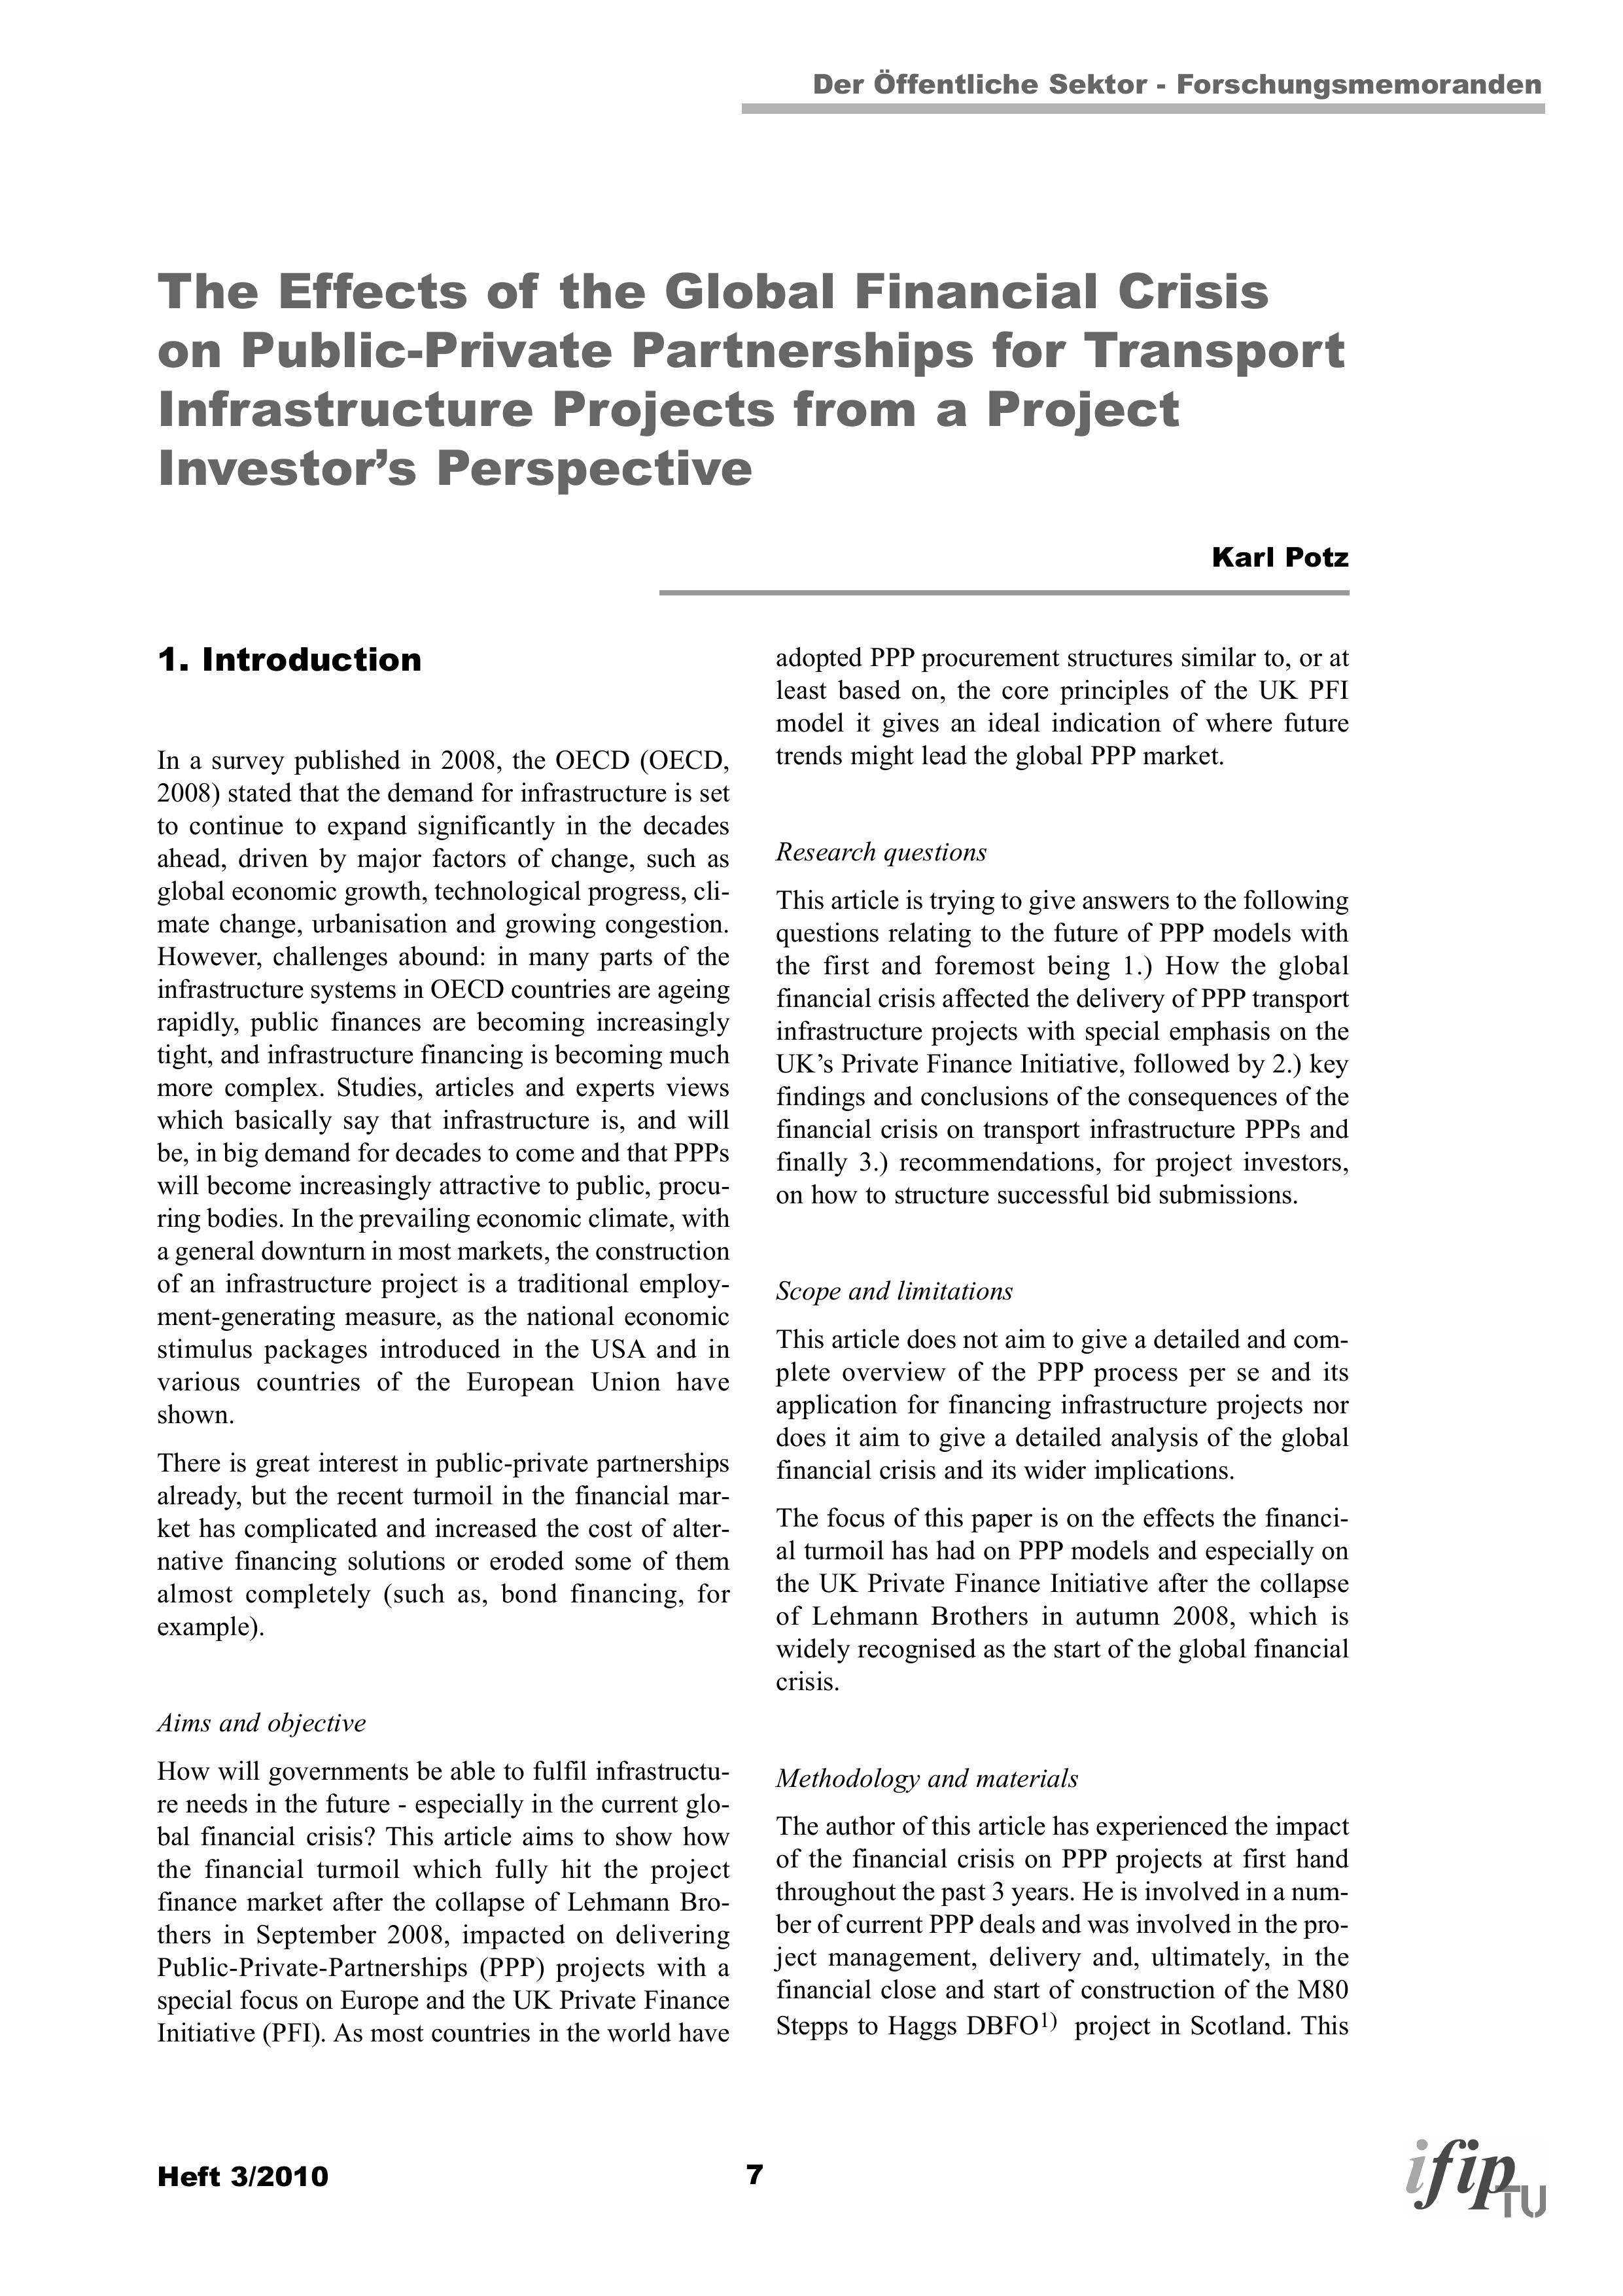 The Effects of the Global Financial Crisis on Public-Private Partnerships for Transport Infrastructure Projects from a Project Investors Perspective